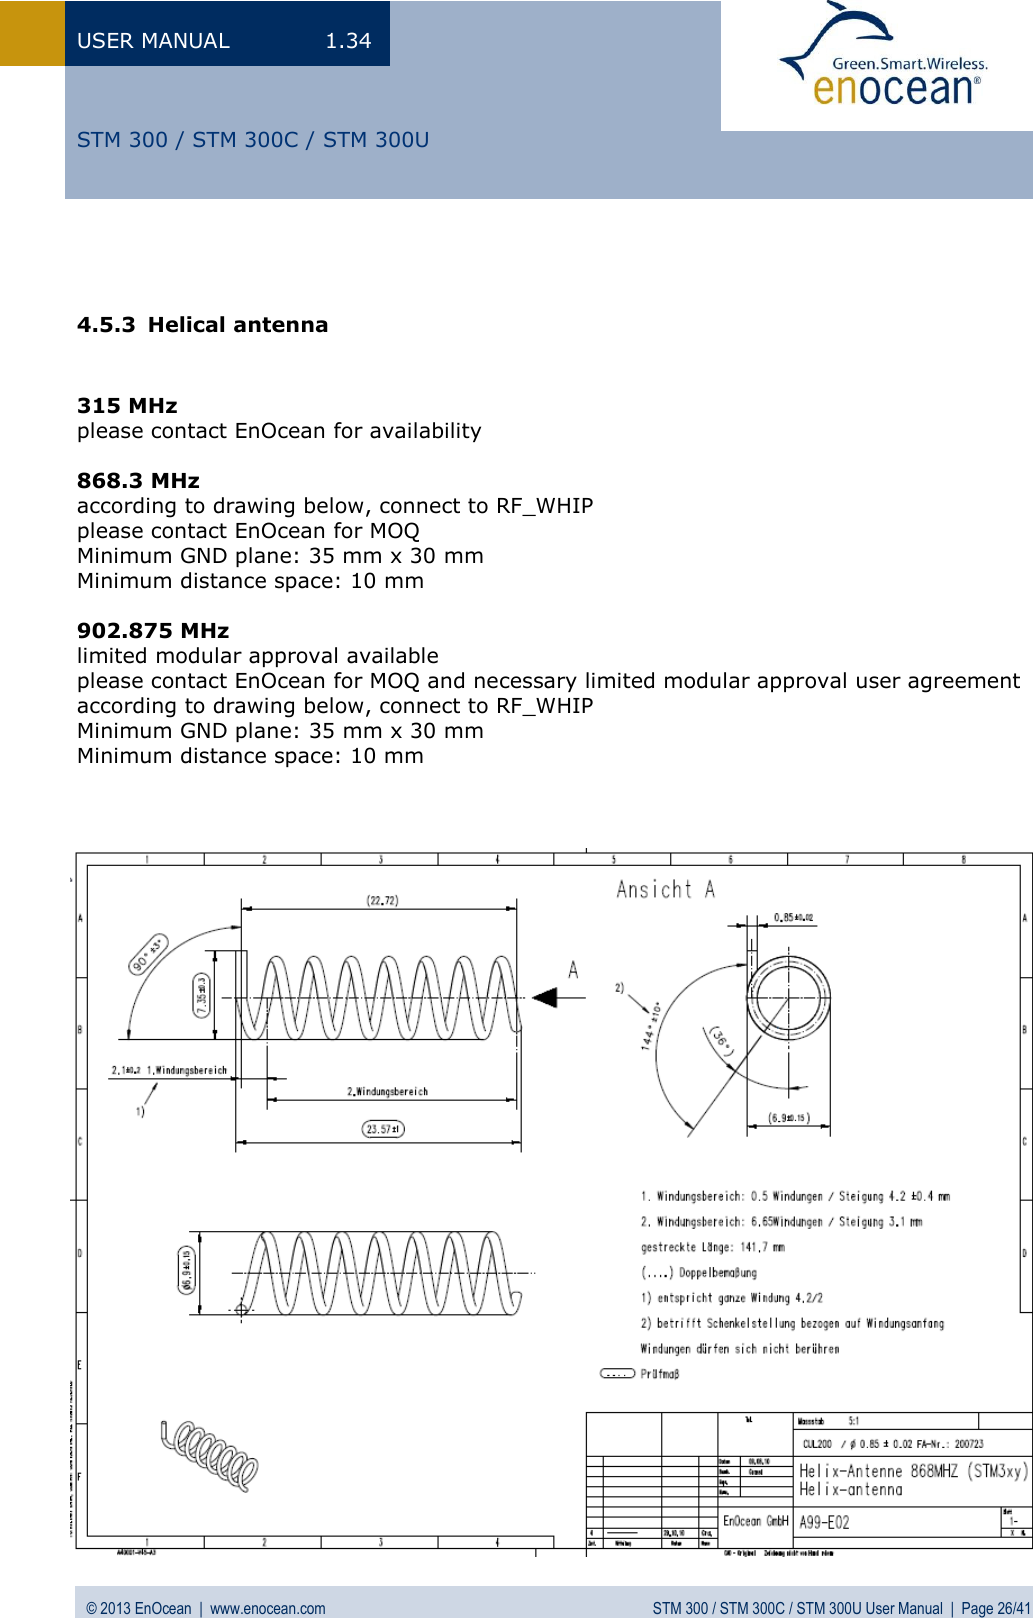 USER MANUAL  1.34 © 2013 EnOcean  |  www.enocean.com  STM 300 / STM 300C / STM 300U User Manual  |  Page 26/41   STM 300 / STM 300C / STM 300U   4.5.3 Helical antenna   315 MHz please contact EnOcean for availability   868.3 MHz according to drawing below, connect to RF_WHIP  please contact EnOcean for MOQ Minimum GND plane: 35 mm x 30 mm Minimum distance space: 10 mm  902.875 MHz limited modular approval available please contact EnOcean for MOQ and necessary limited modular approval user agreement according to drawing below, connect to RF_WHIP Minimum GND plane: 35 mm x 30 mm Minimum distance space: 10 mm                               